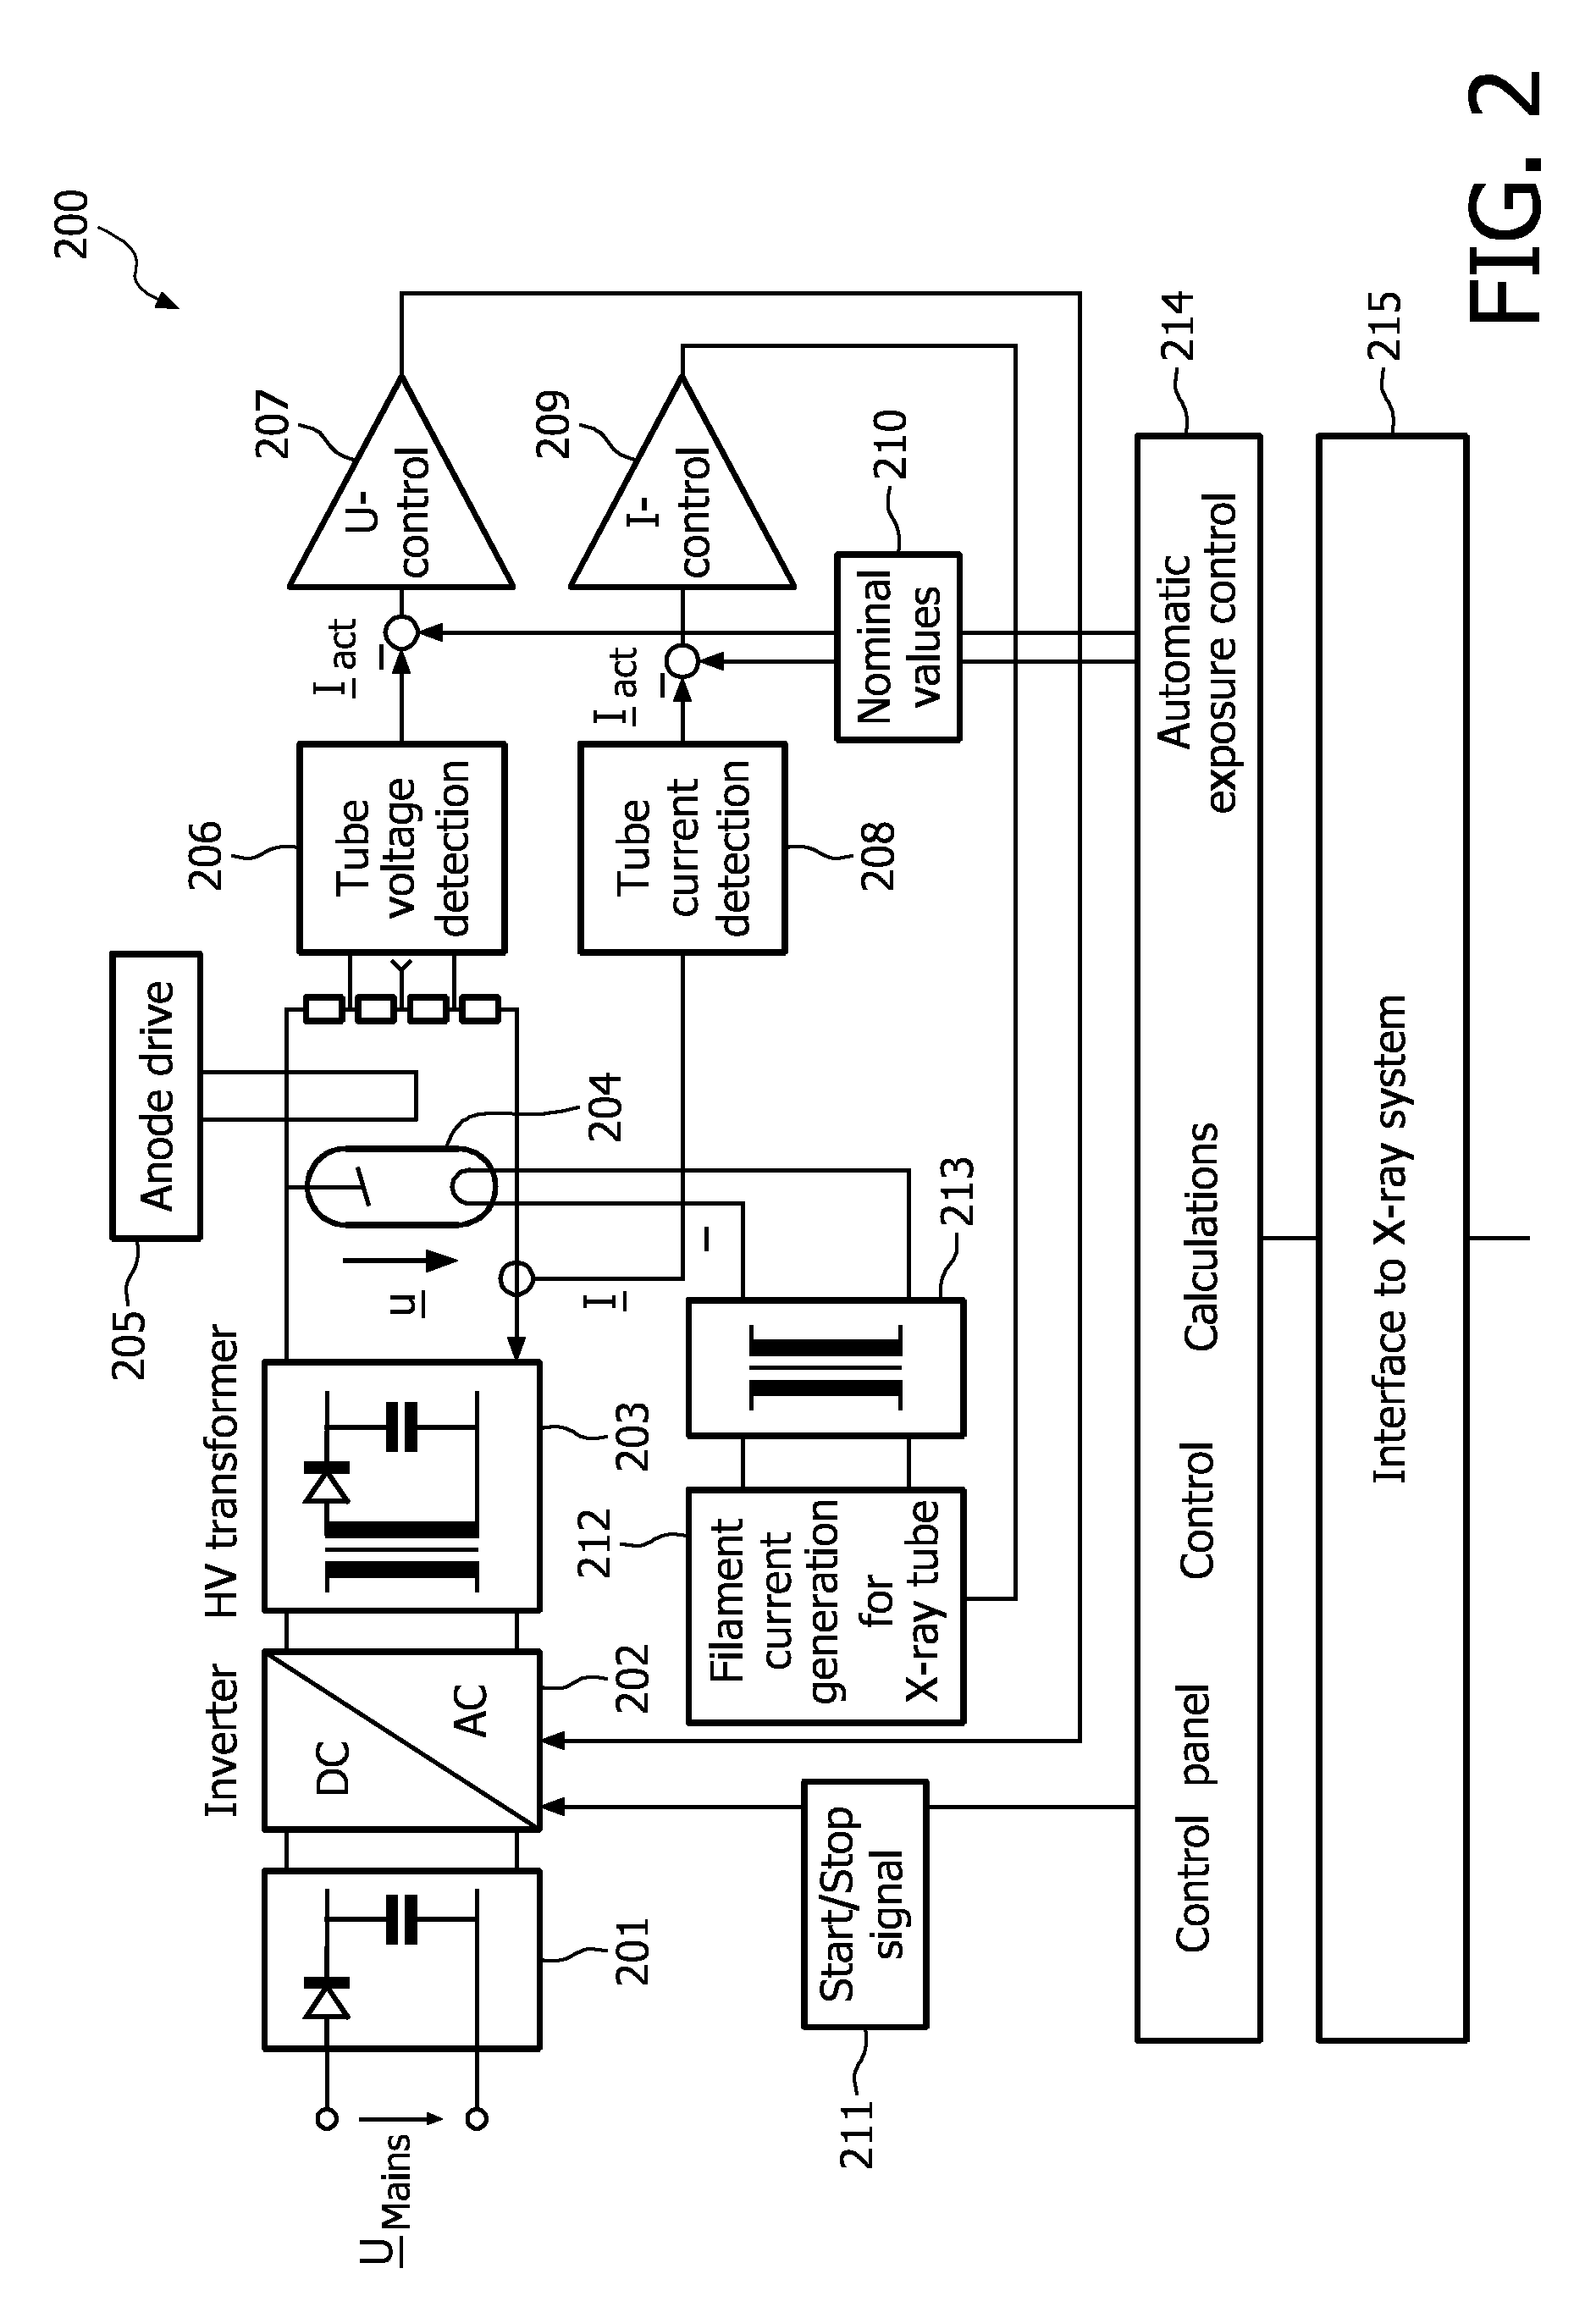 Dc/ac power inverter control unit of a resonant power converter circuit, in particular a dc/dc converter for use in a high-voltage generator circuitry of a modern computed tomography device or x-ray radiographic system